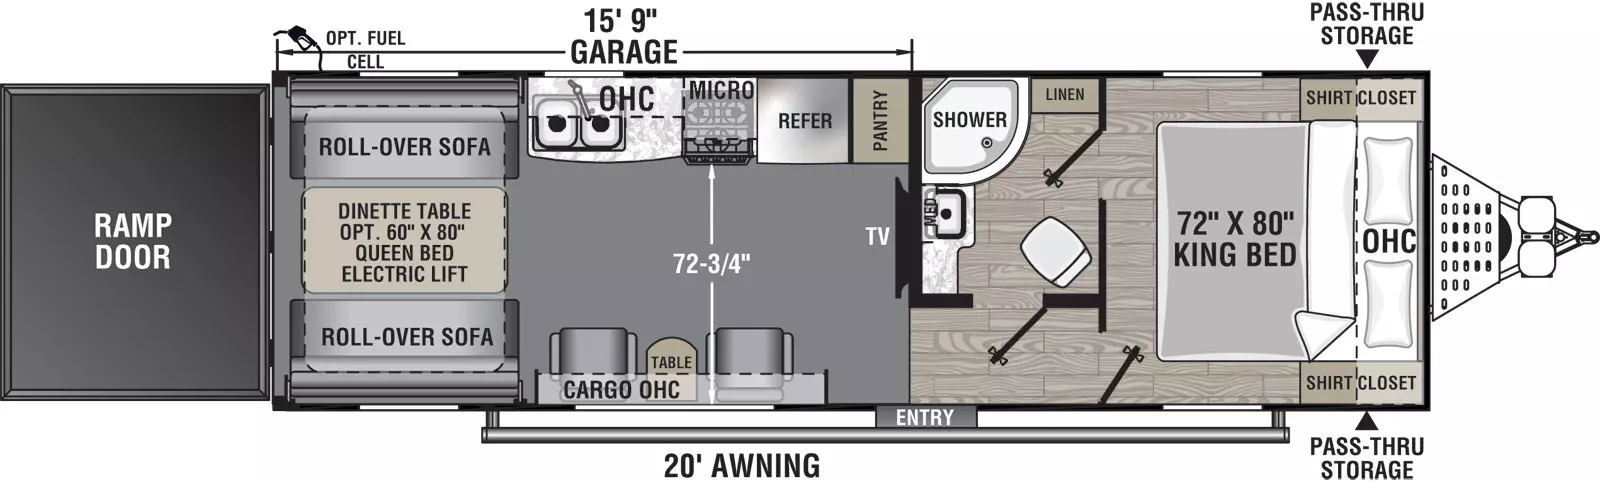 The 27LT has no slide outs and one entry door on the door side. Interior layout from front to back: front bedroom with side-facing king bed and overhead cabinet; walk through bathroom on off door side; kitchen living dining area; off door side kitchen containing pantry, refrigerator, cook top stove, overhead microwave, double basin sink, and overhead cabinet; two euro chairs on the door side with table and overhead cabinet; one roll-over sofa on door side and one roll-over sofa on the off-door side of the unit; dinette table; and rear ramp door.